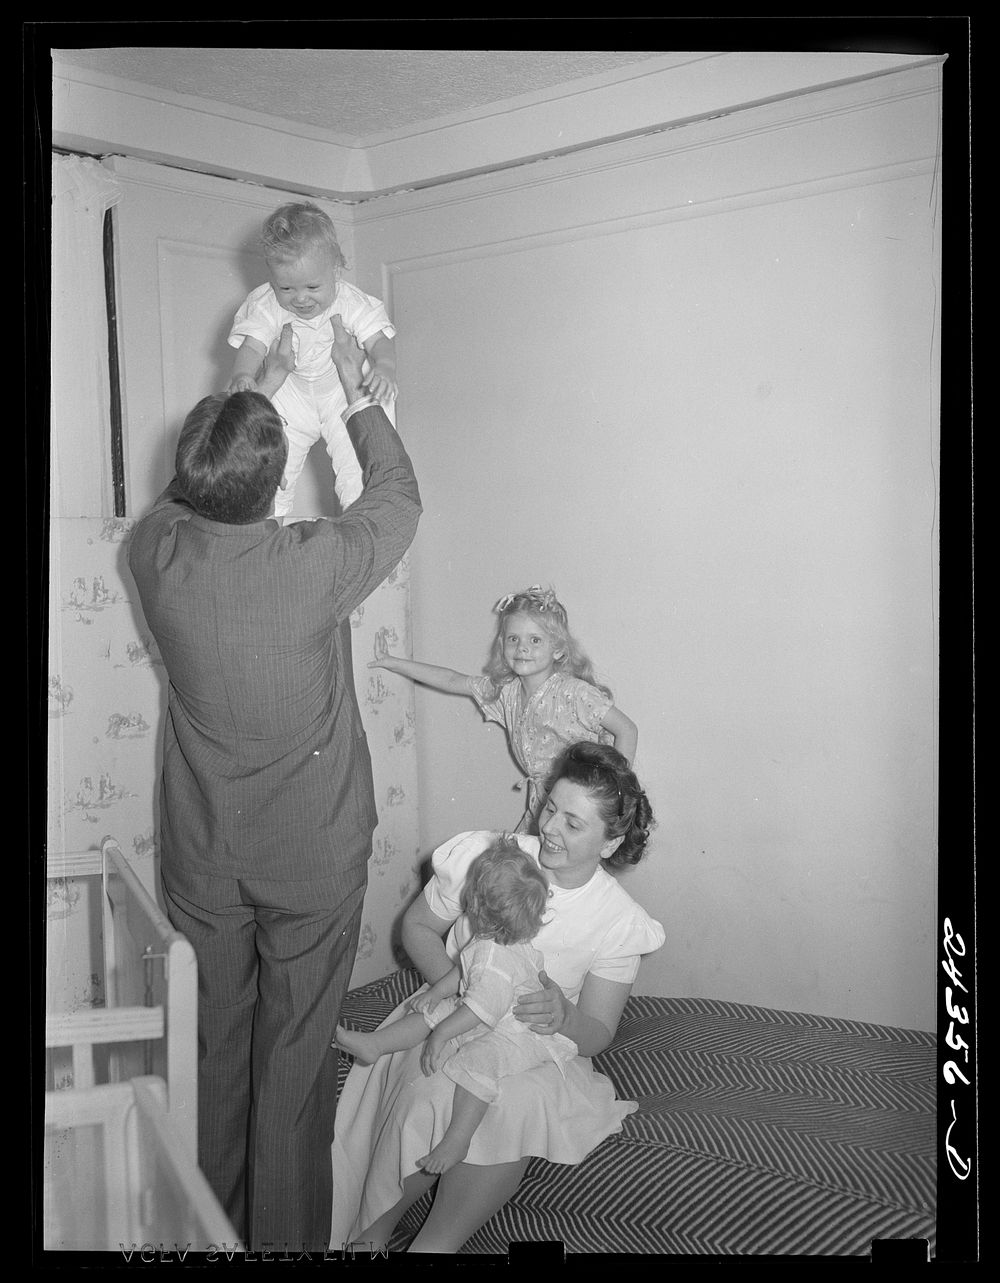 [Untitled photo, possibly related to: Family living at Forest Hills. New York City]. Sourced from the Library of Congress.